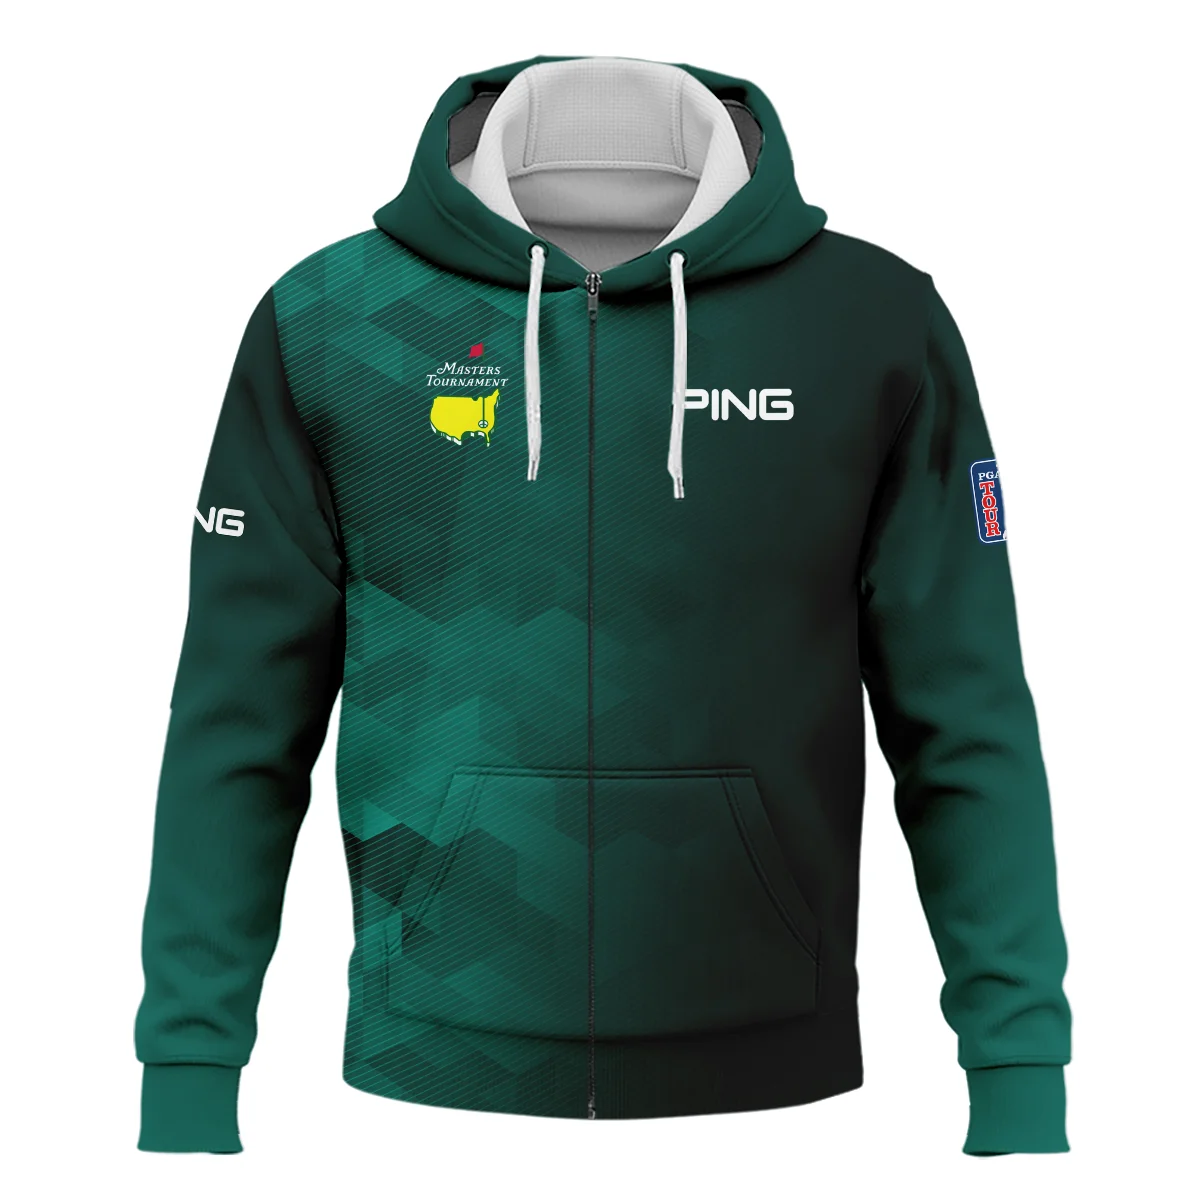 Ping Golf Sport Dark Green Gradient Abstract Background Masters Tournament Sleeveless Jacket Style Classic Sleeveless Jacket